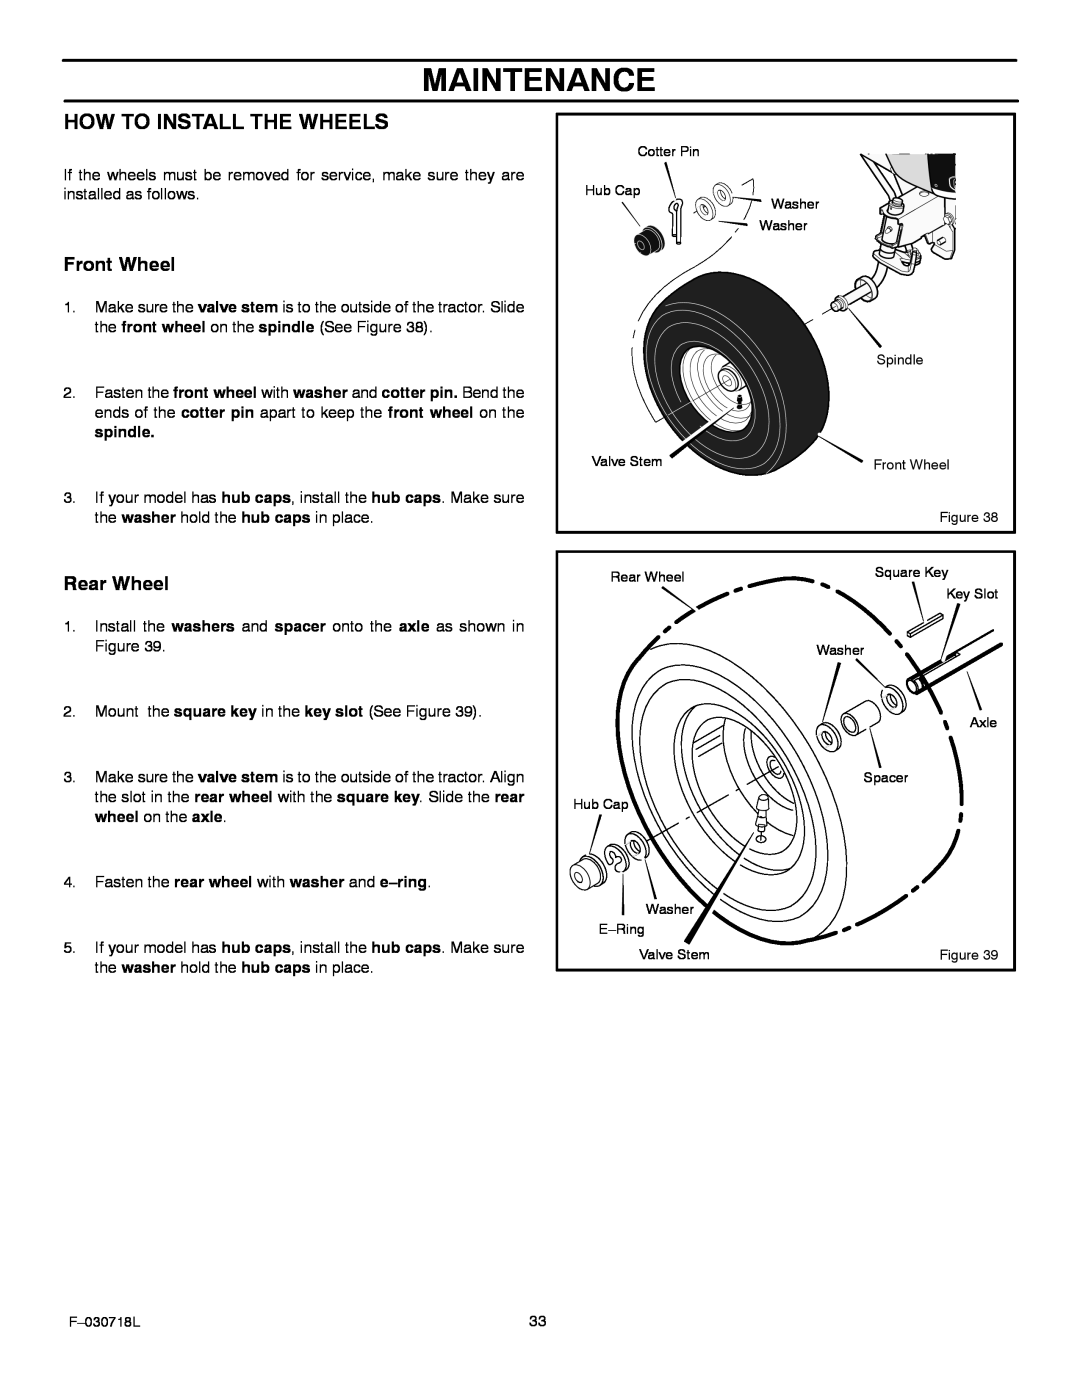 Murray 461000x8A manual Maintenance, How To Install The Wheels, Front Wheel, Rear Wheel 